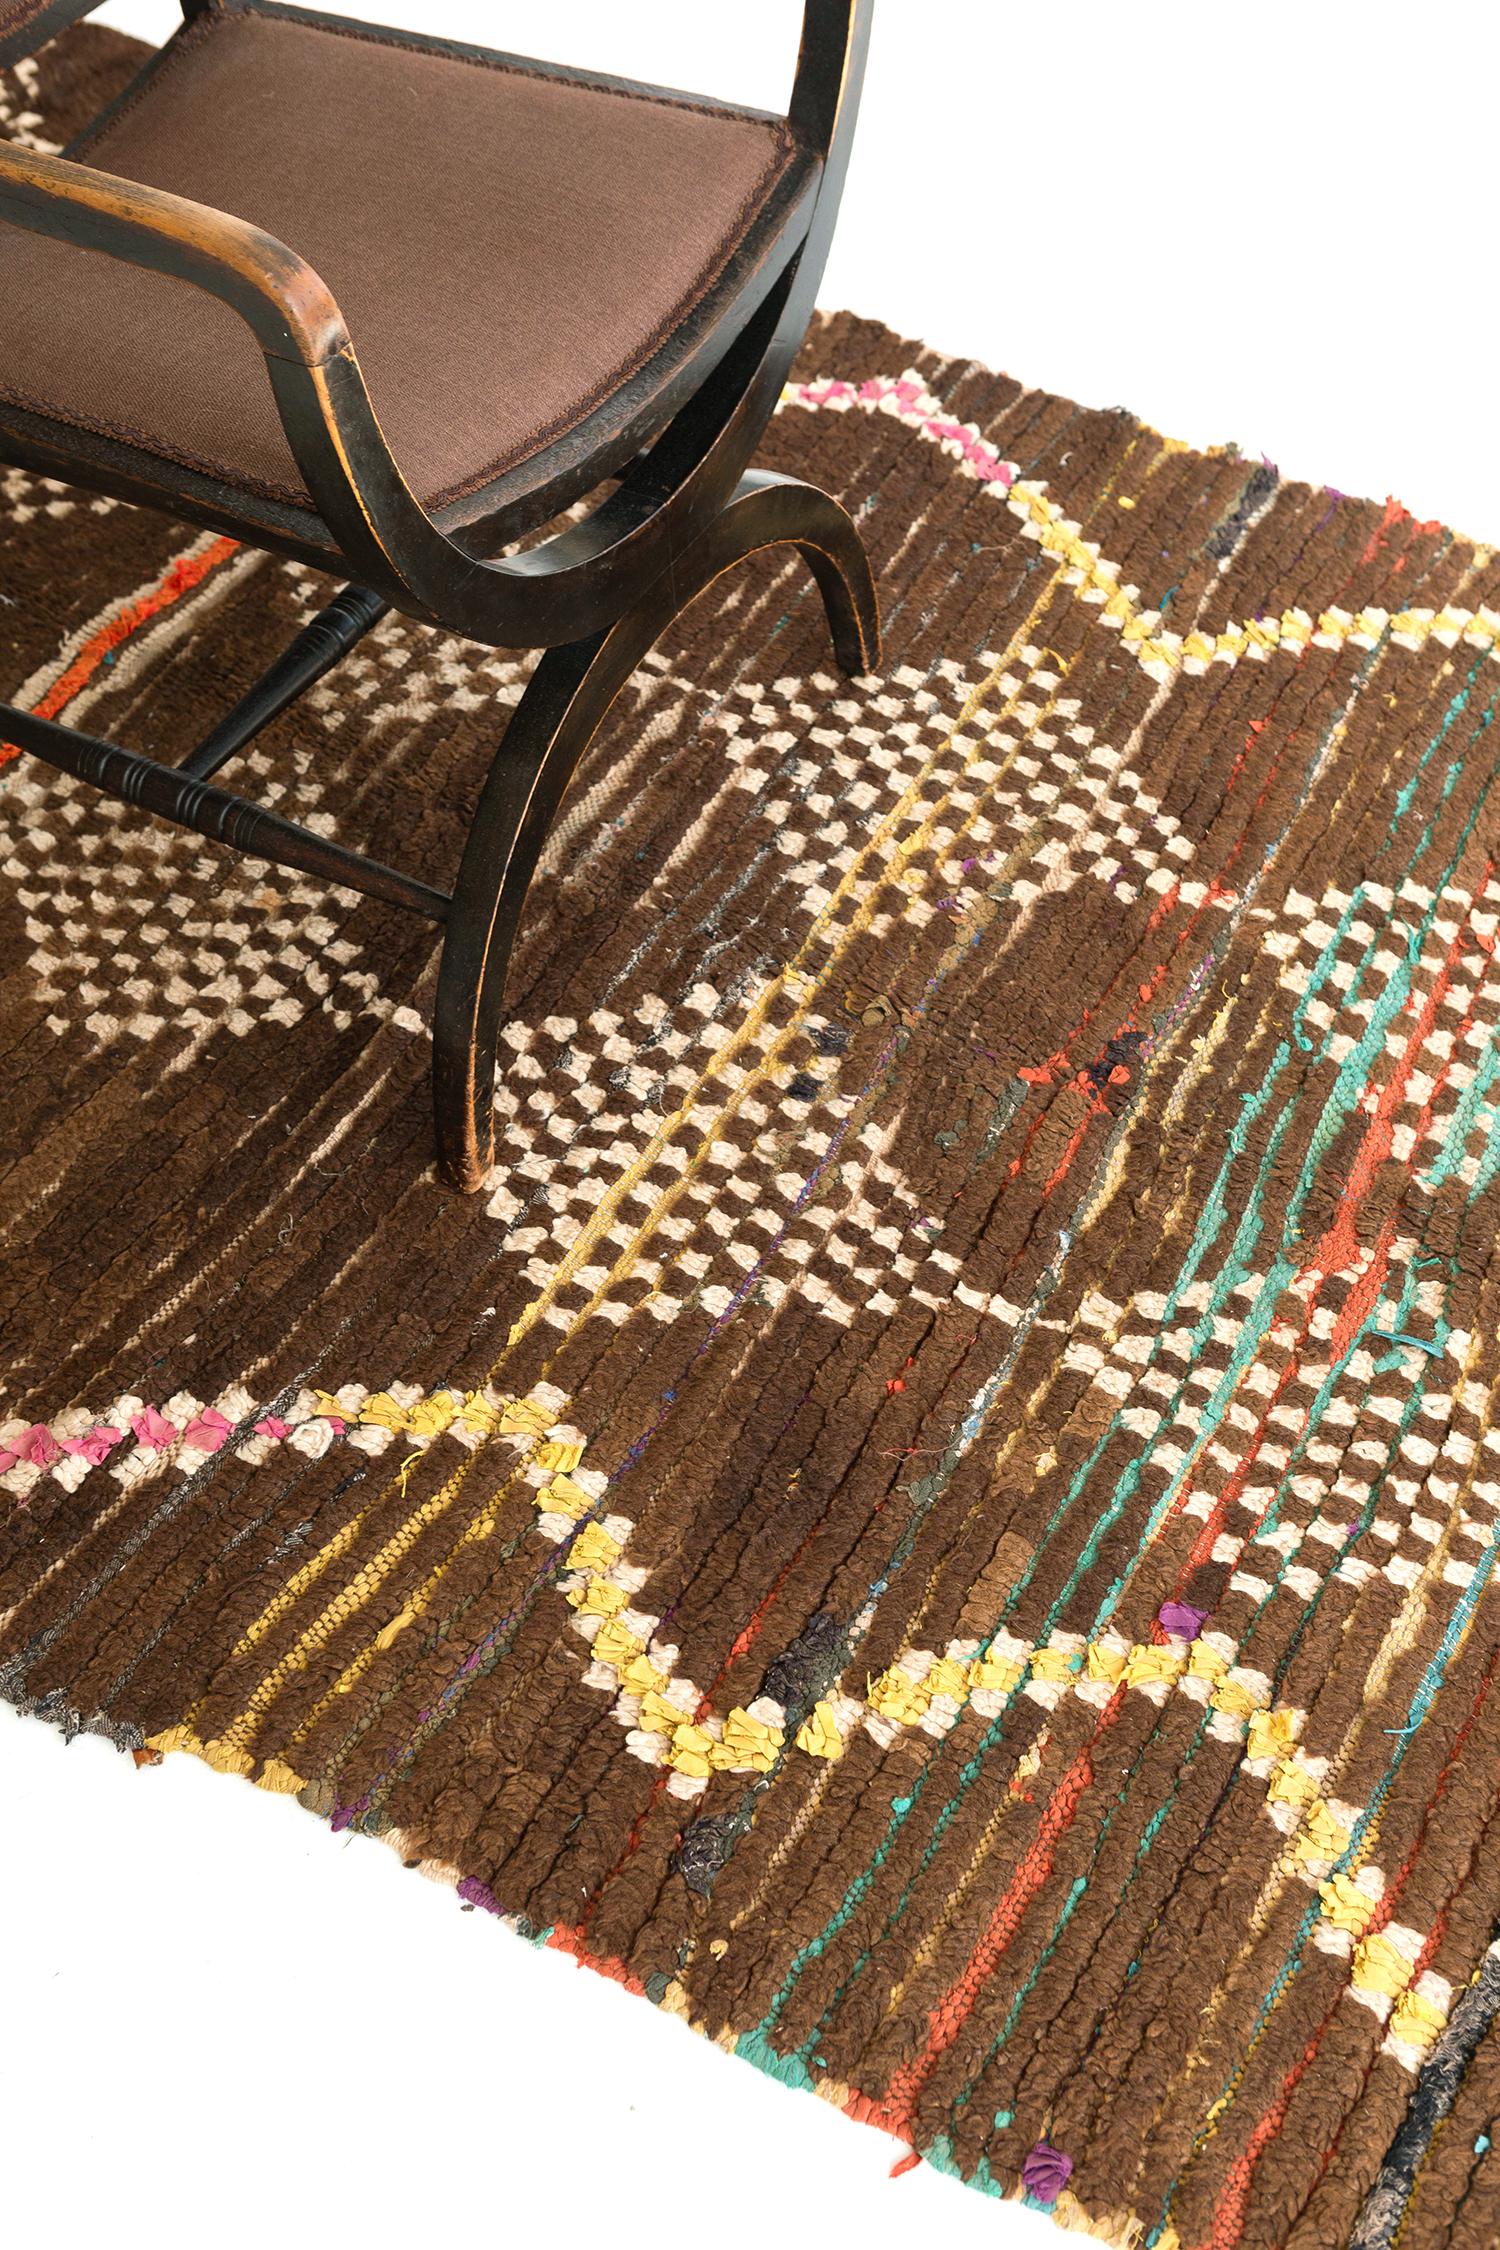 Revealing the well-defined chevrons and twenty checkered lozenge trellis, this wondrous rug will definitely captivate you upon laying your eyes on this Vintage Moroccan Rug Rika Atlas inspired rug. Featuring the earthy neutral tones, this rug